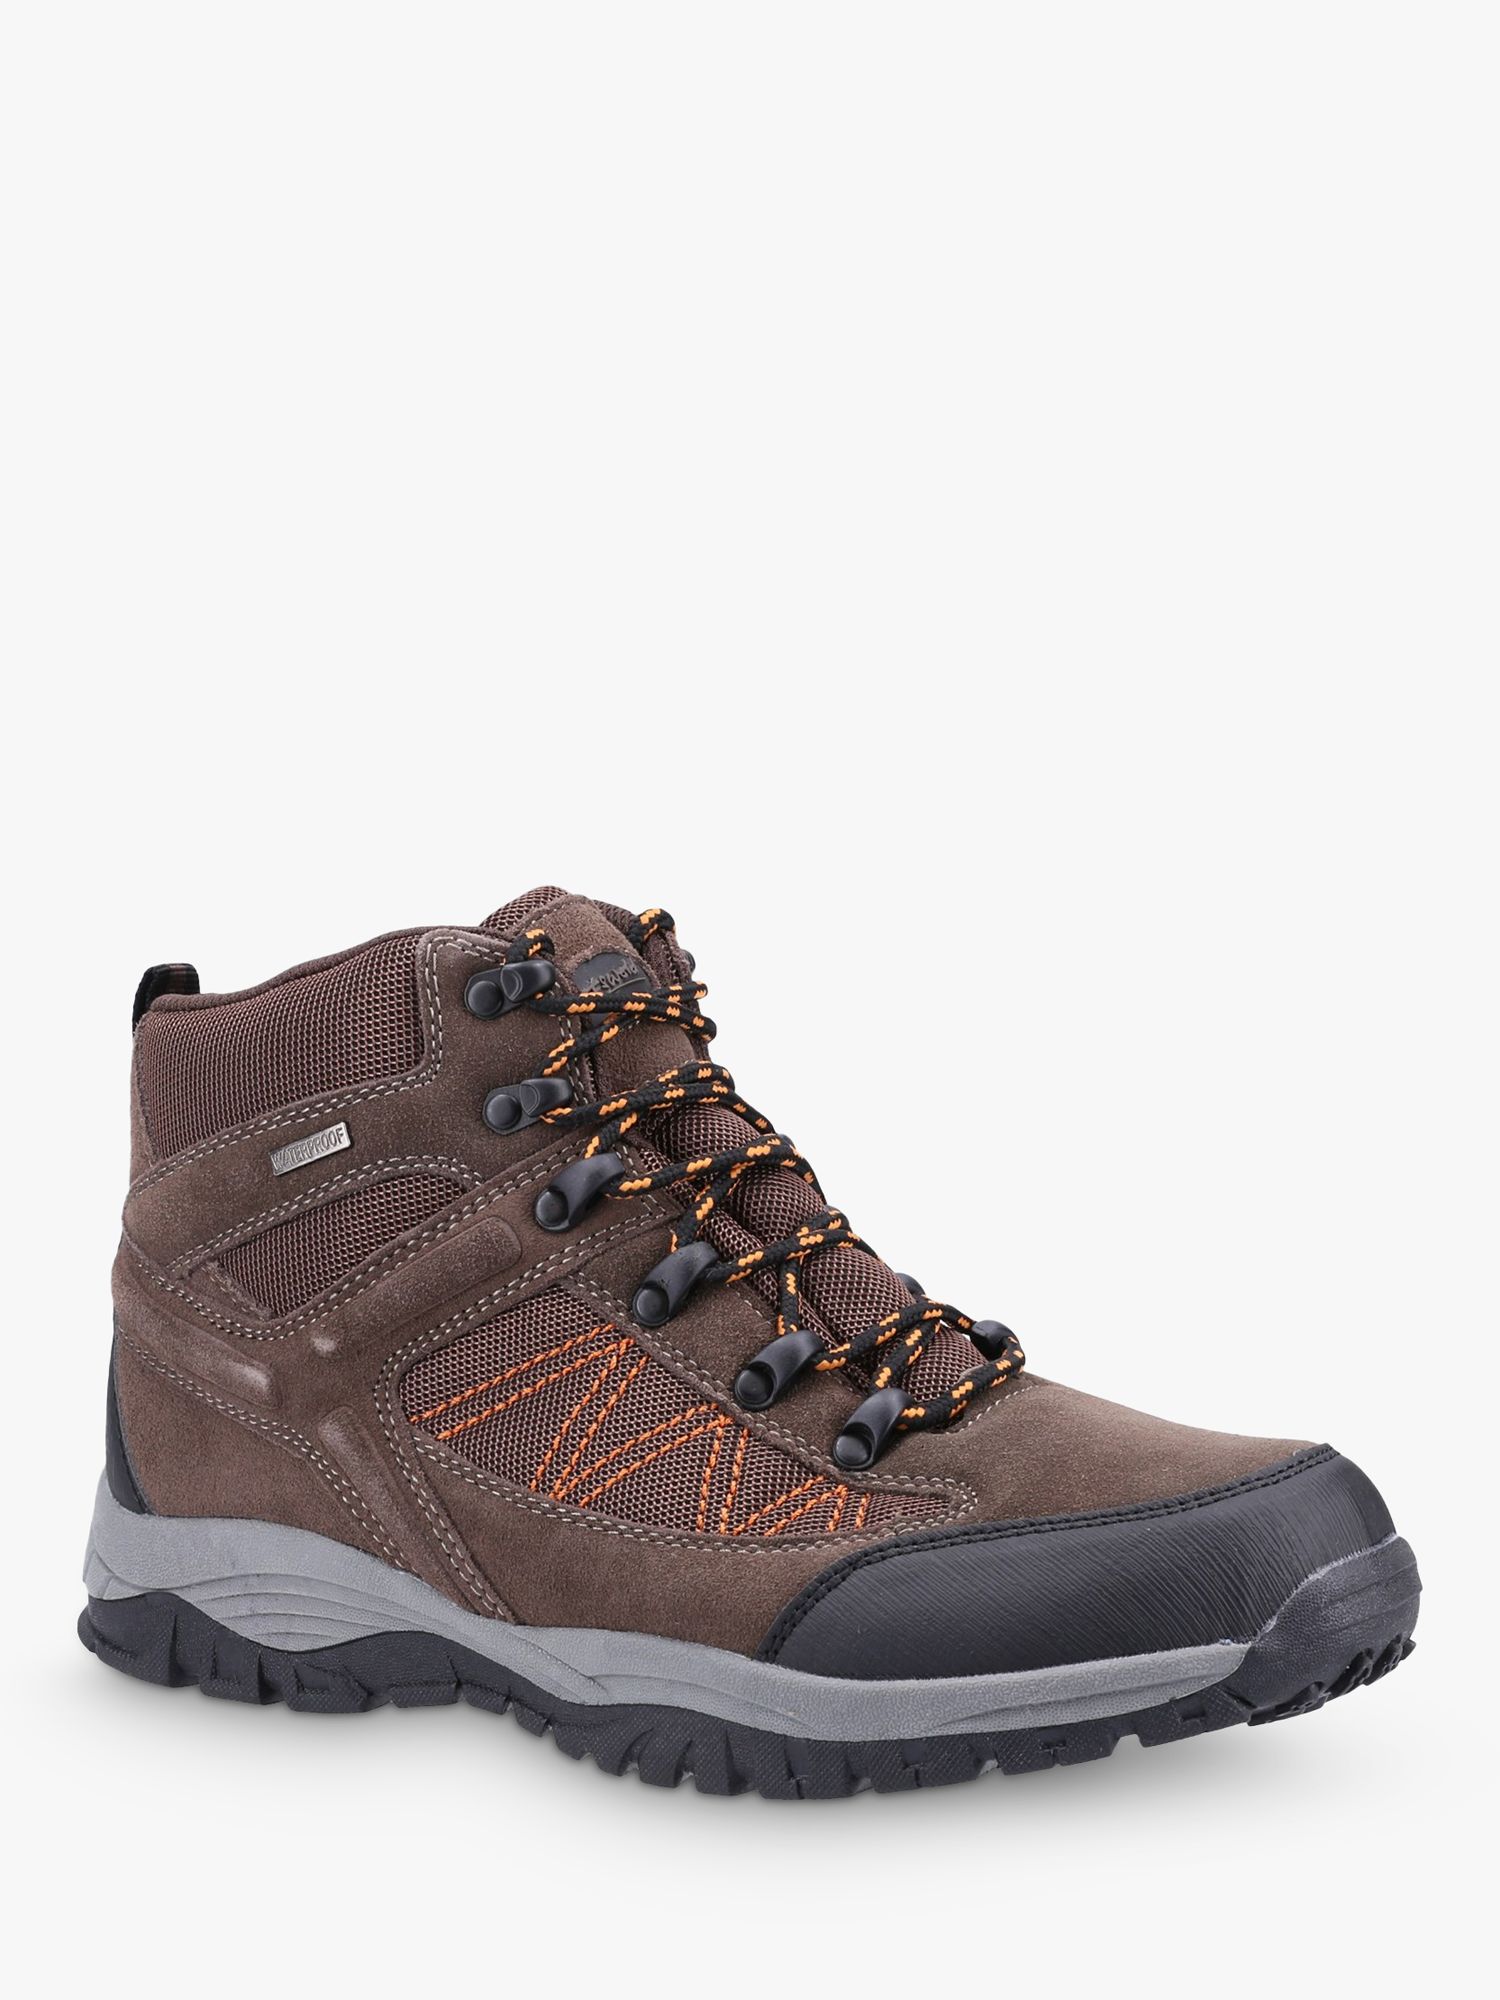 Cotswold Maisemore Walking Boots at John Lewis & Partners